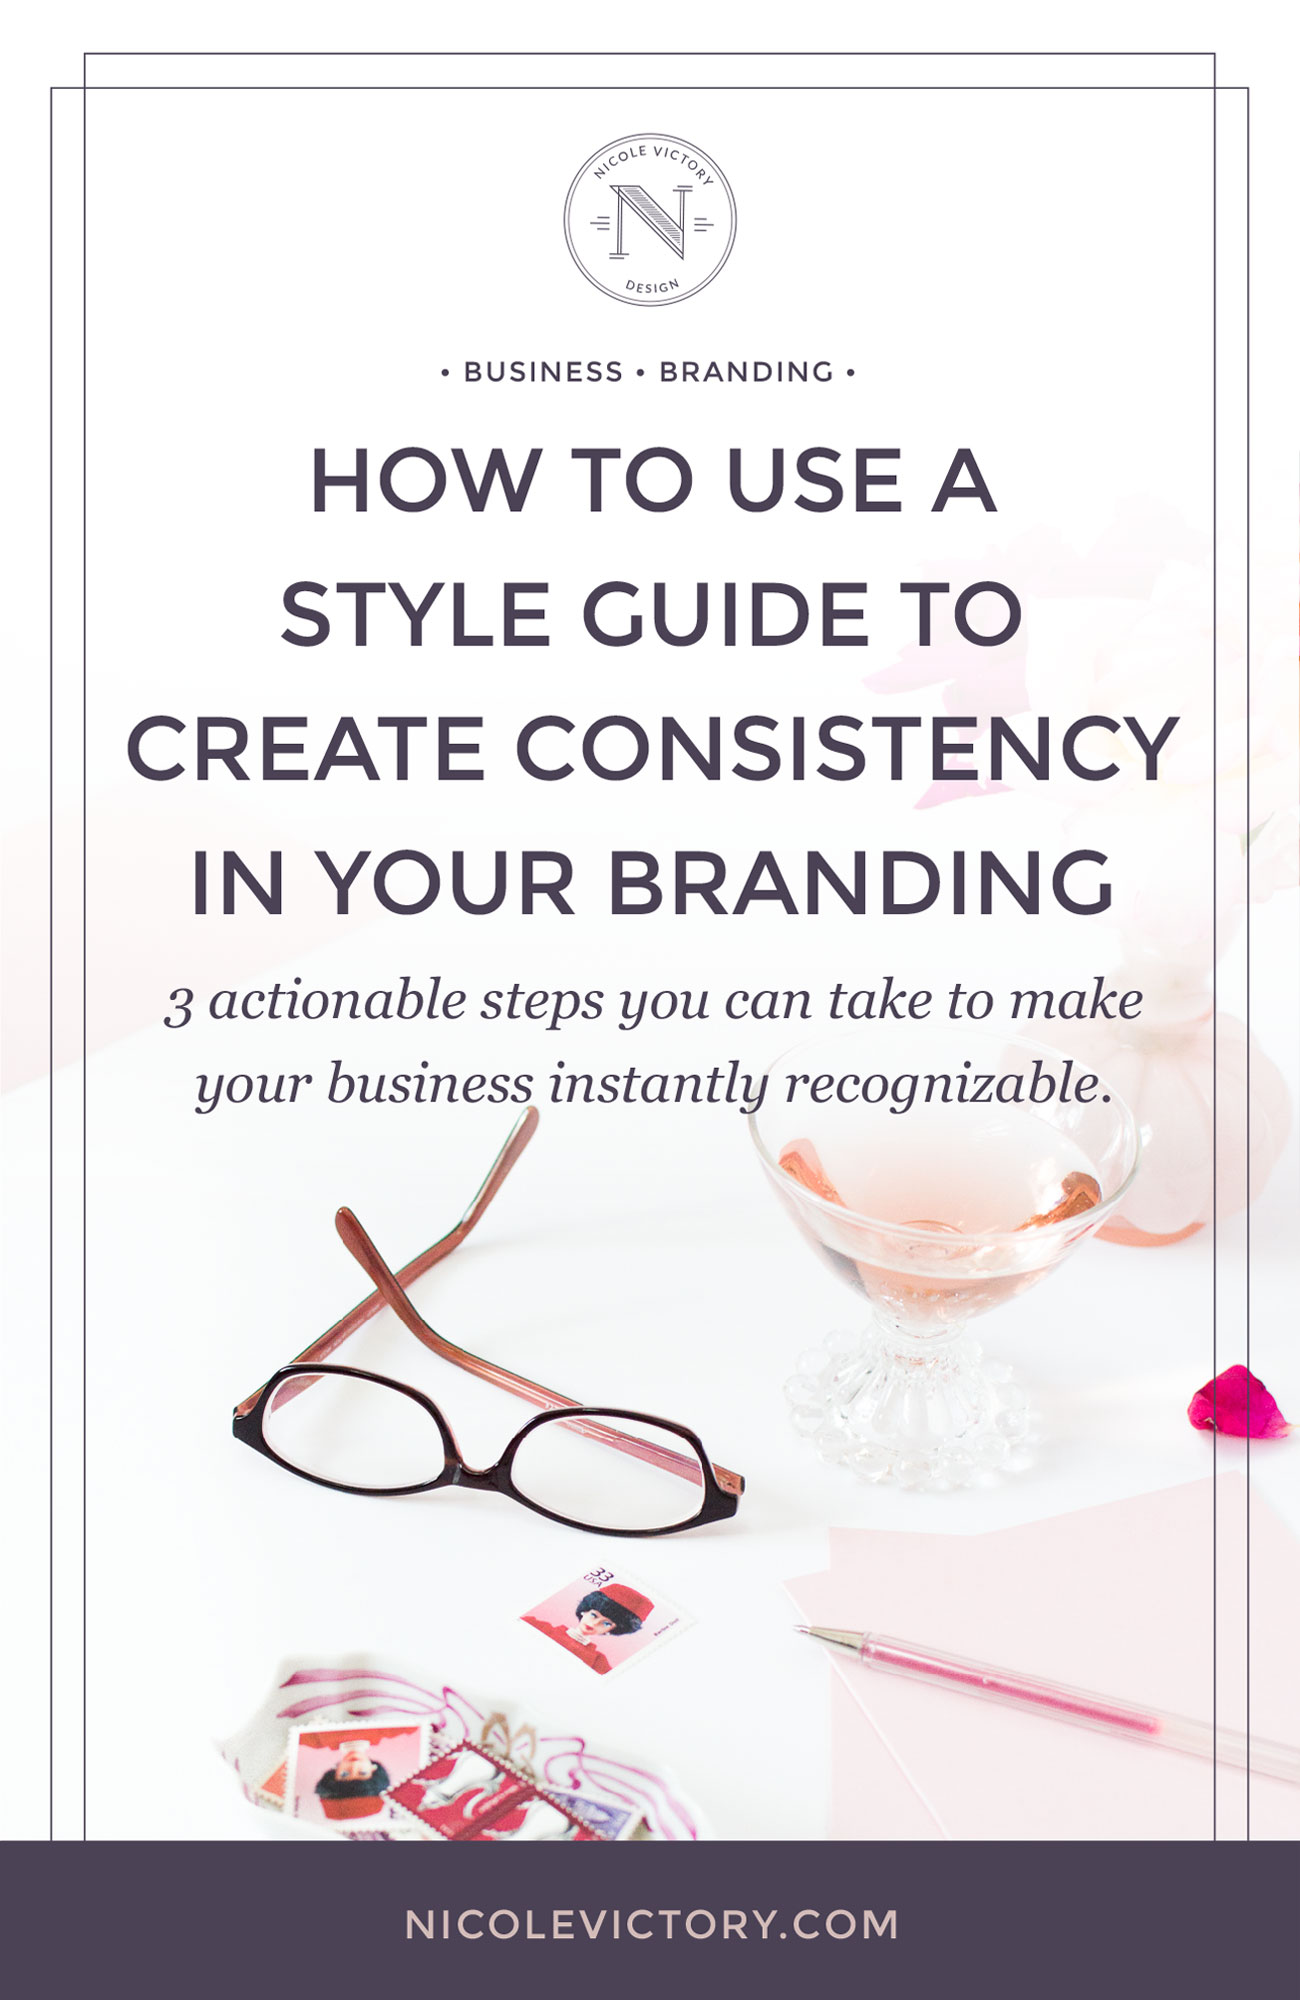 How to use a style guide to create consistency in your branding | Nicole Victory Design